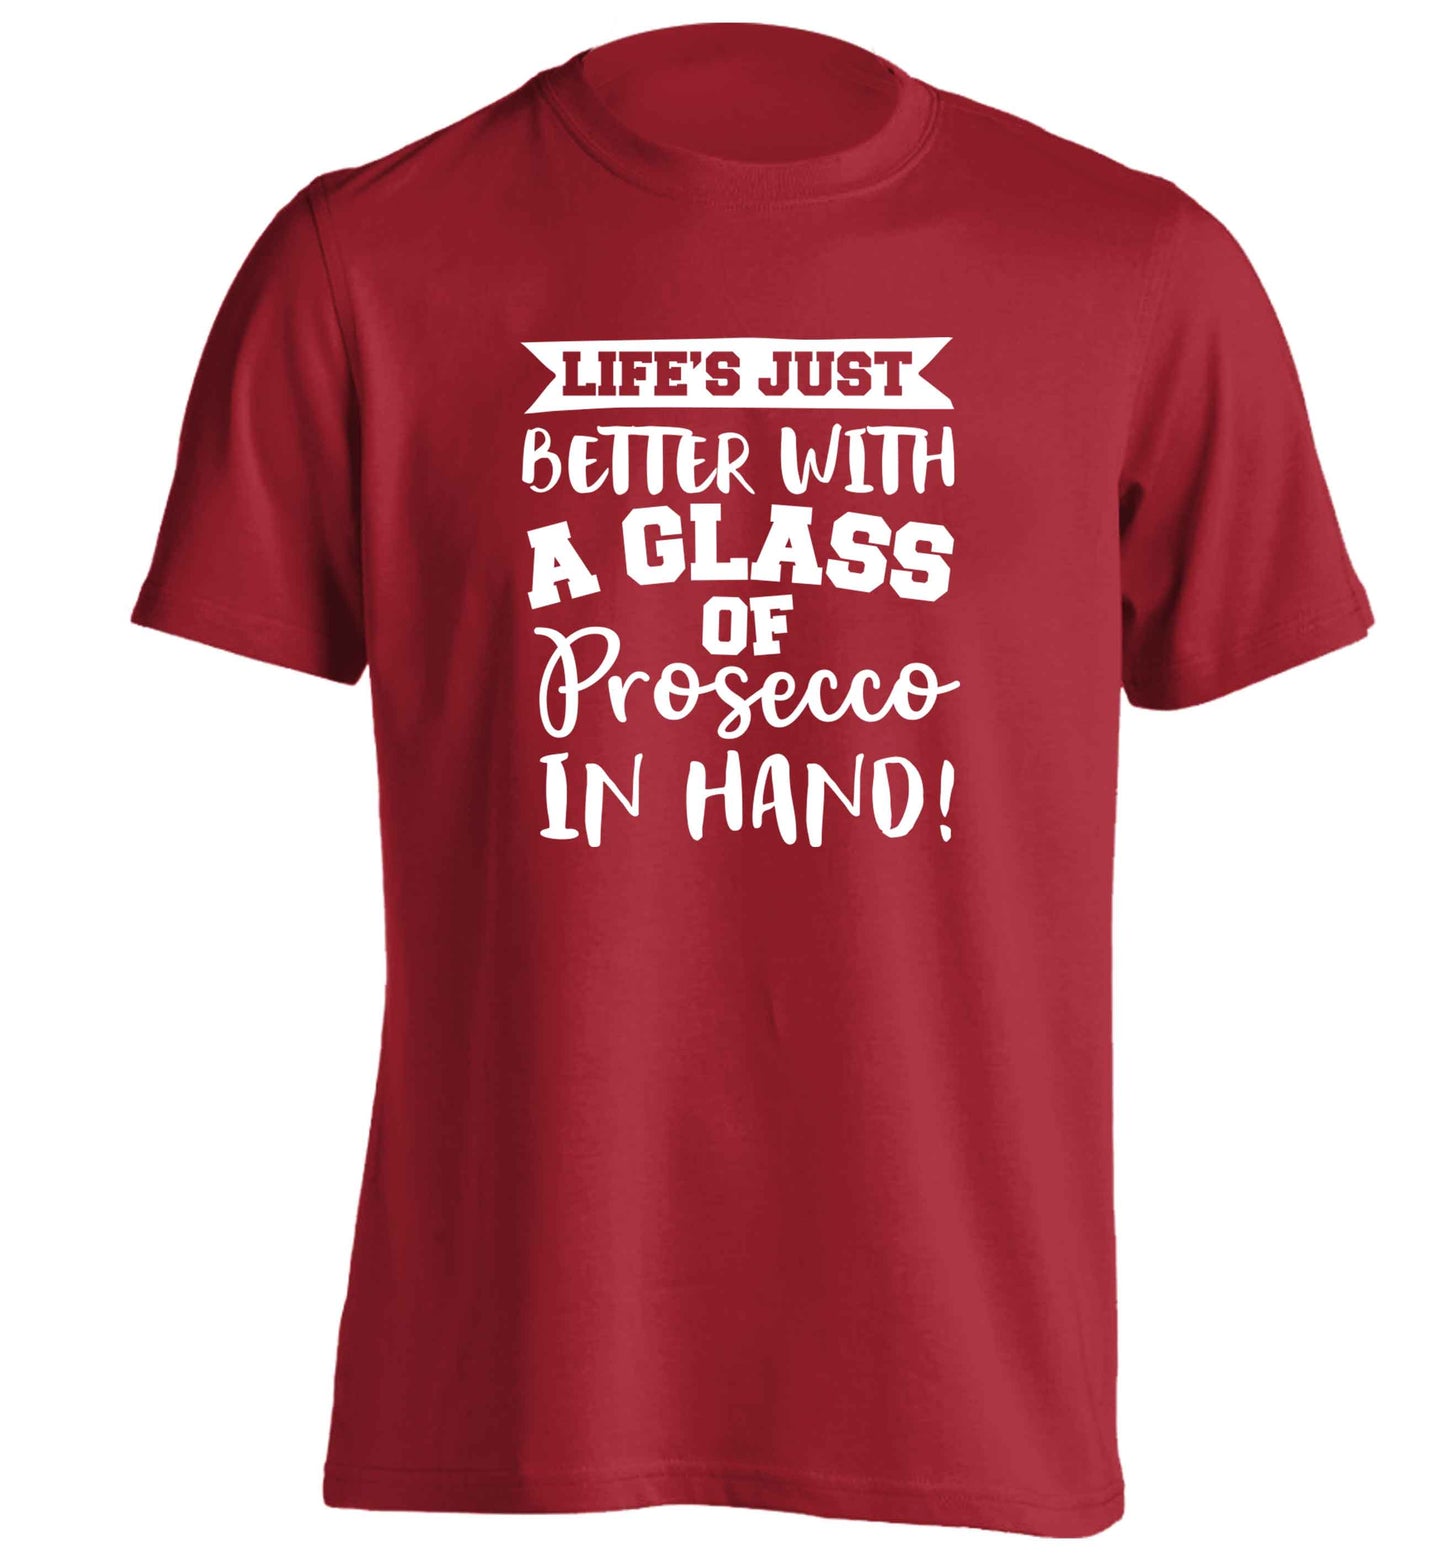 Life's just better with a glass of prosecco in hand adults unisex red Tshirt 2XL